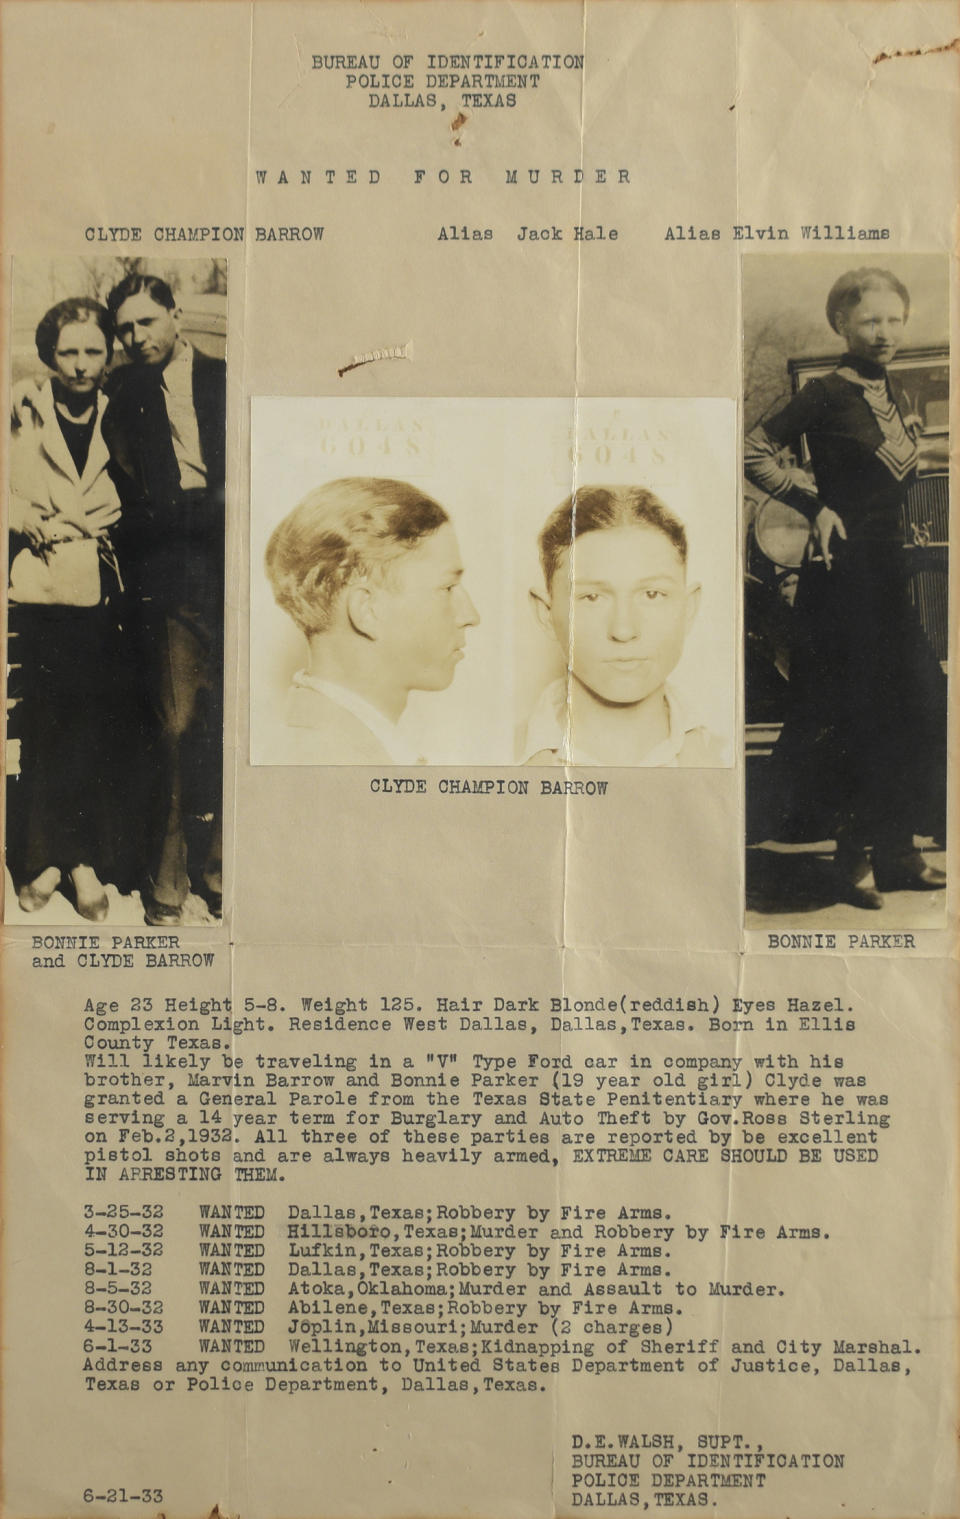 In this July 29, 2019, photo provided by RR Auction, a wanted poster of Bonnie Parker and Clyde Barrow are shown. A book of poetry handwritten by Bonnie Parker and a watch belonging to Clyde Barrow are among items from the outlaw Texas couple being offered at auction. (AP Photo/RR Auction, Nikki Brickett)